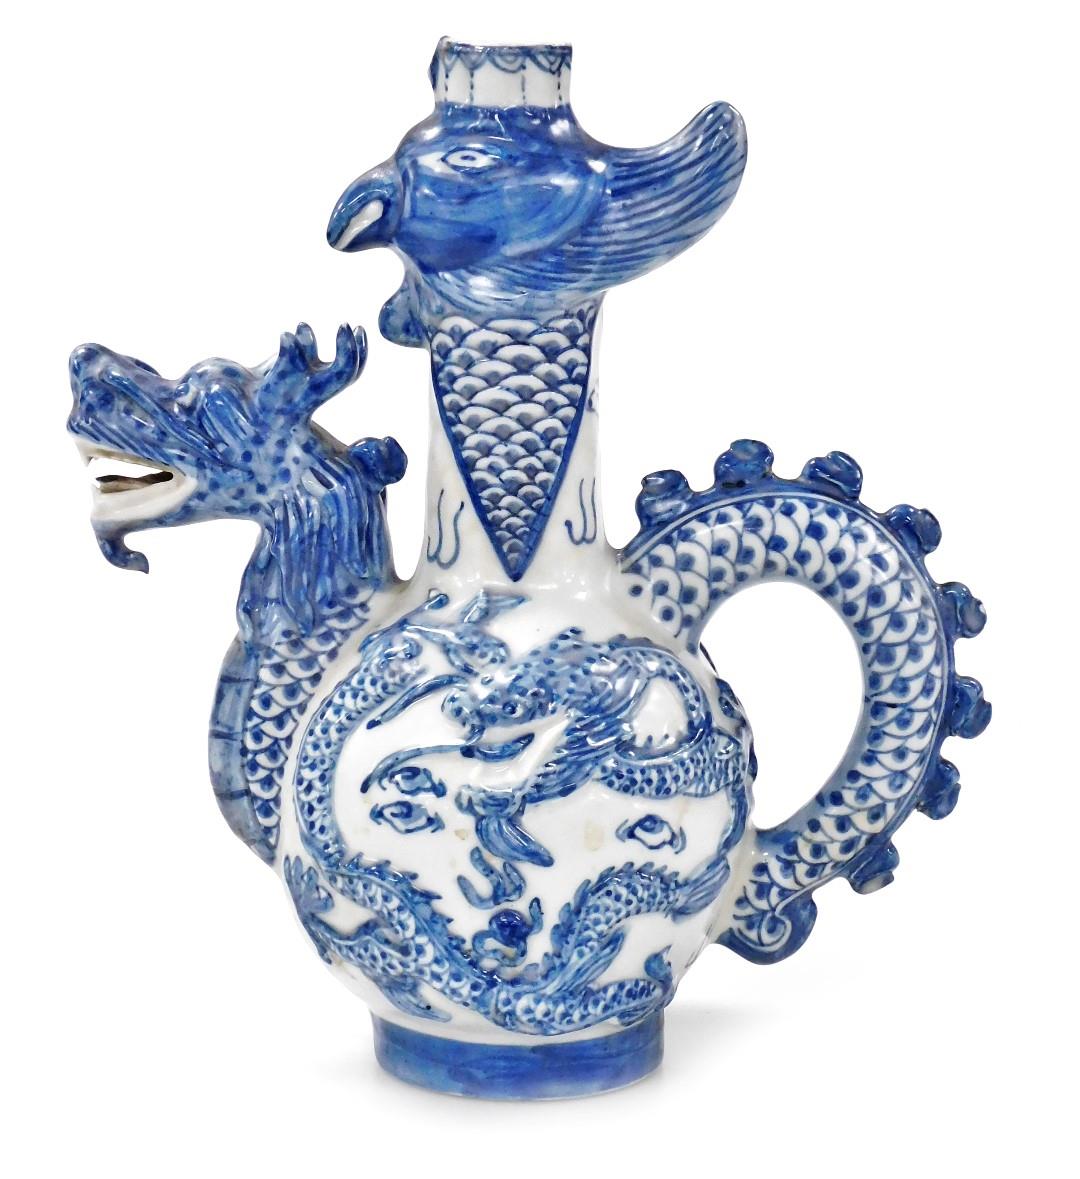 A 20thC Chinese blue and white bottle jug, with a dragon's head spout and tail handle, the bottle wi